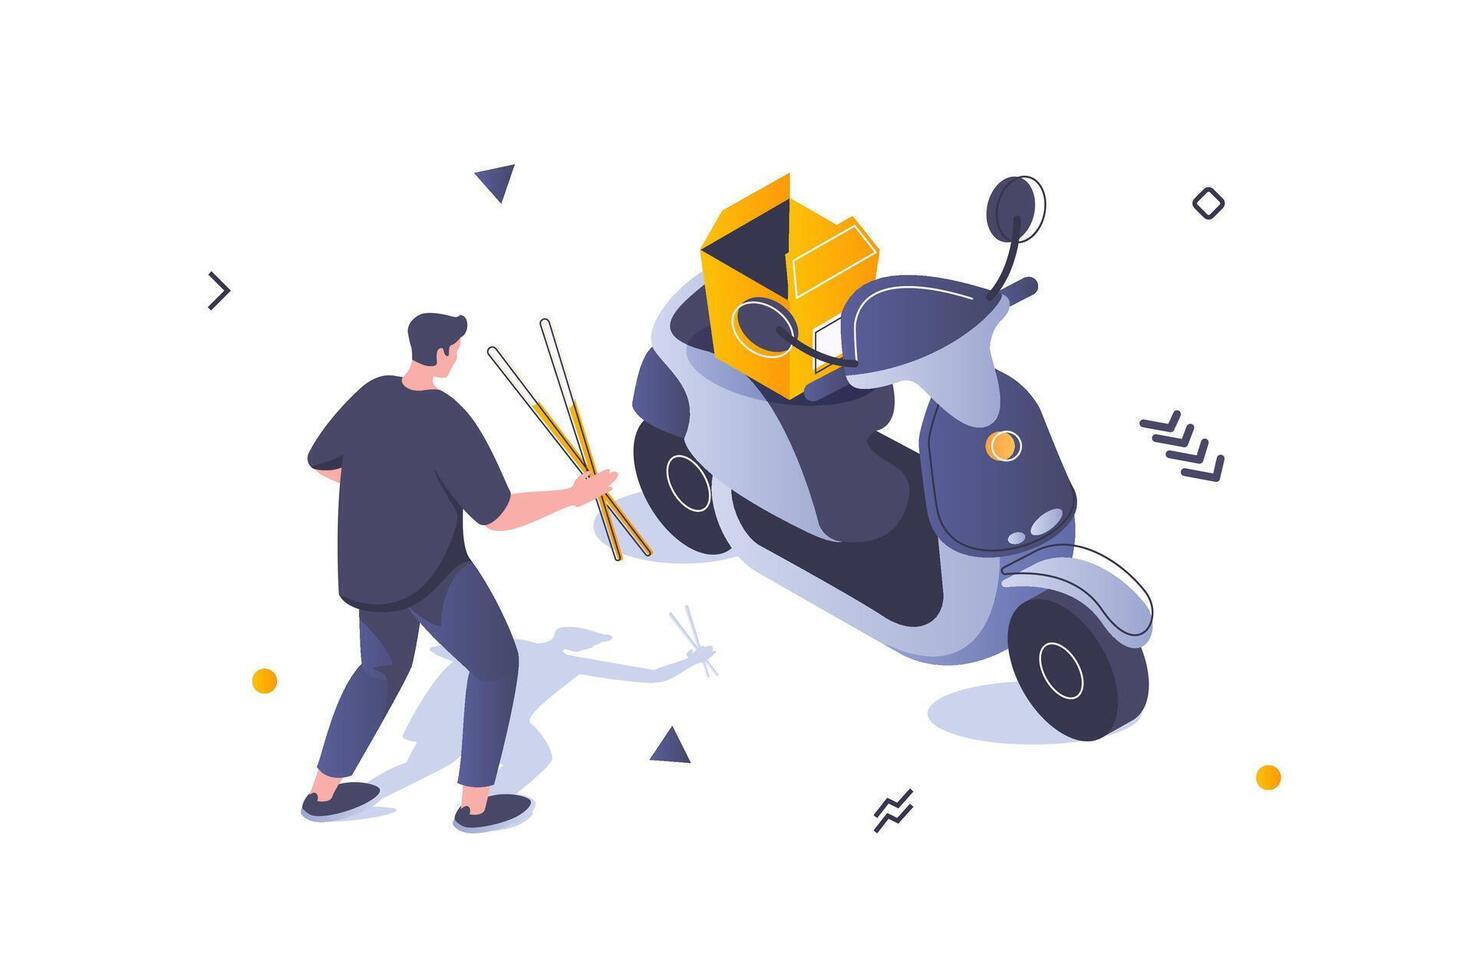 Food delivery concept in 3d isometric design. Man receives his order parcel from restaurant using fast courier shipping on scooter. Vector illustration with isometric people scene for web graphic